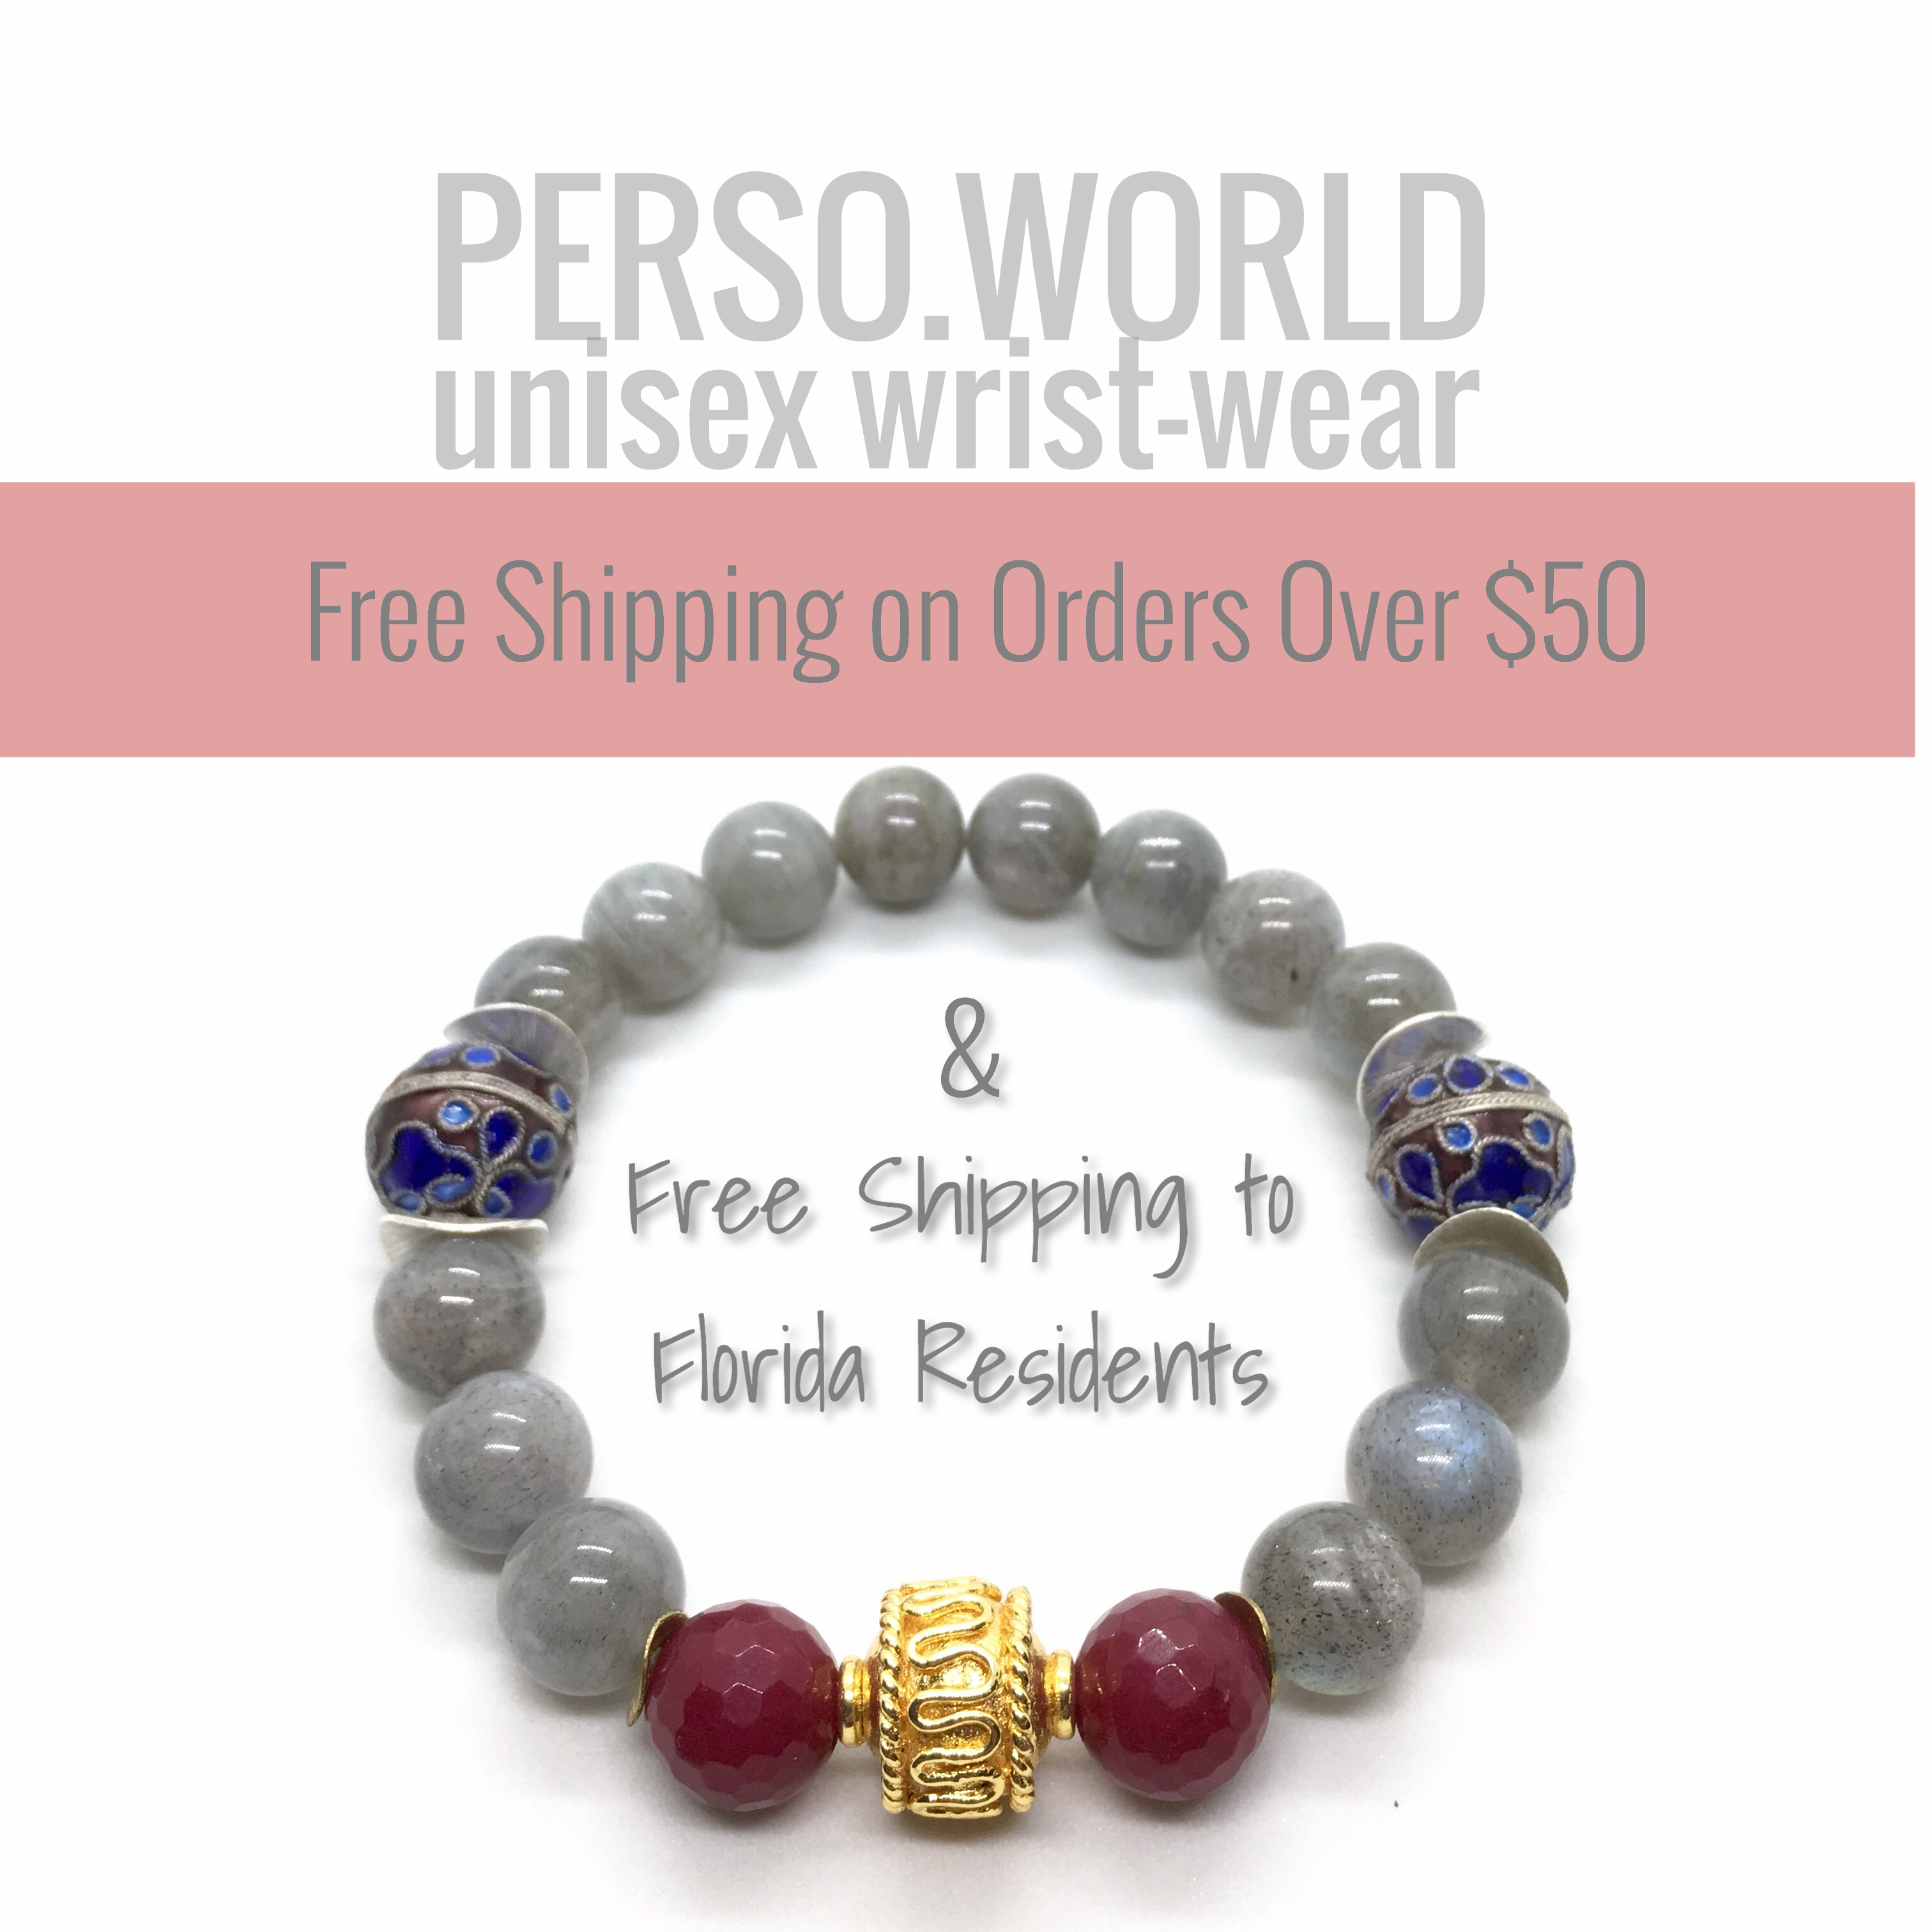 Free U.S. Shipping Options Available!